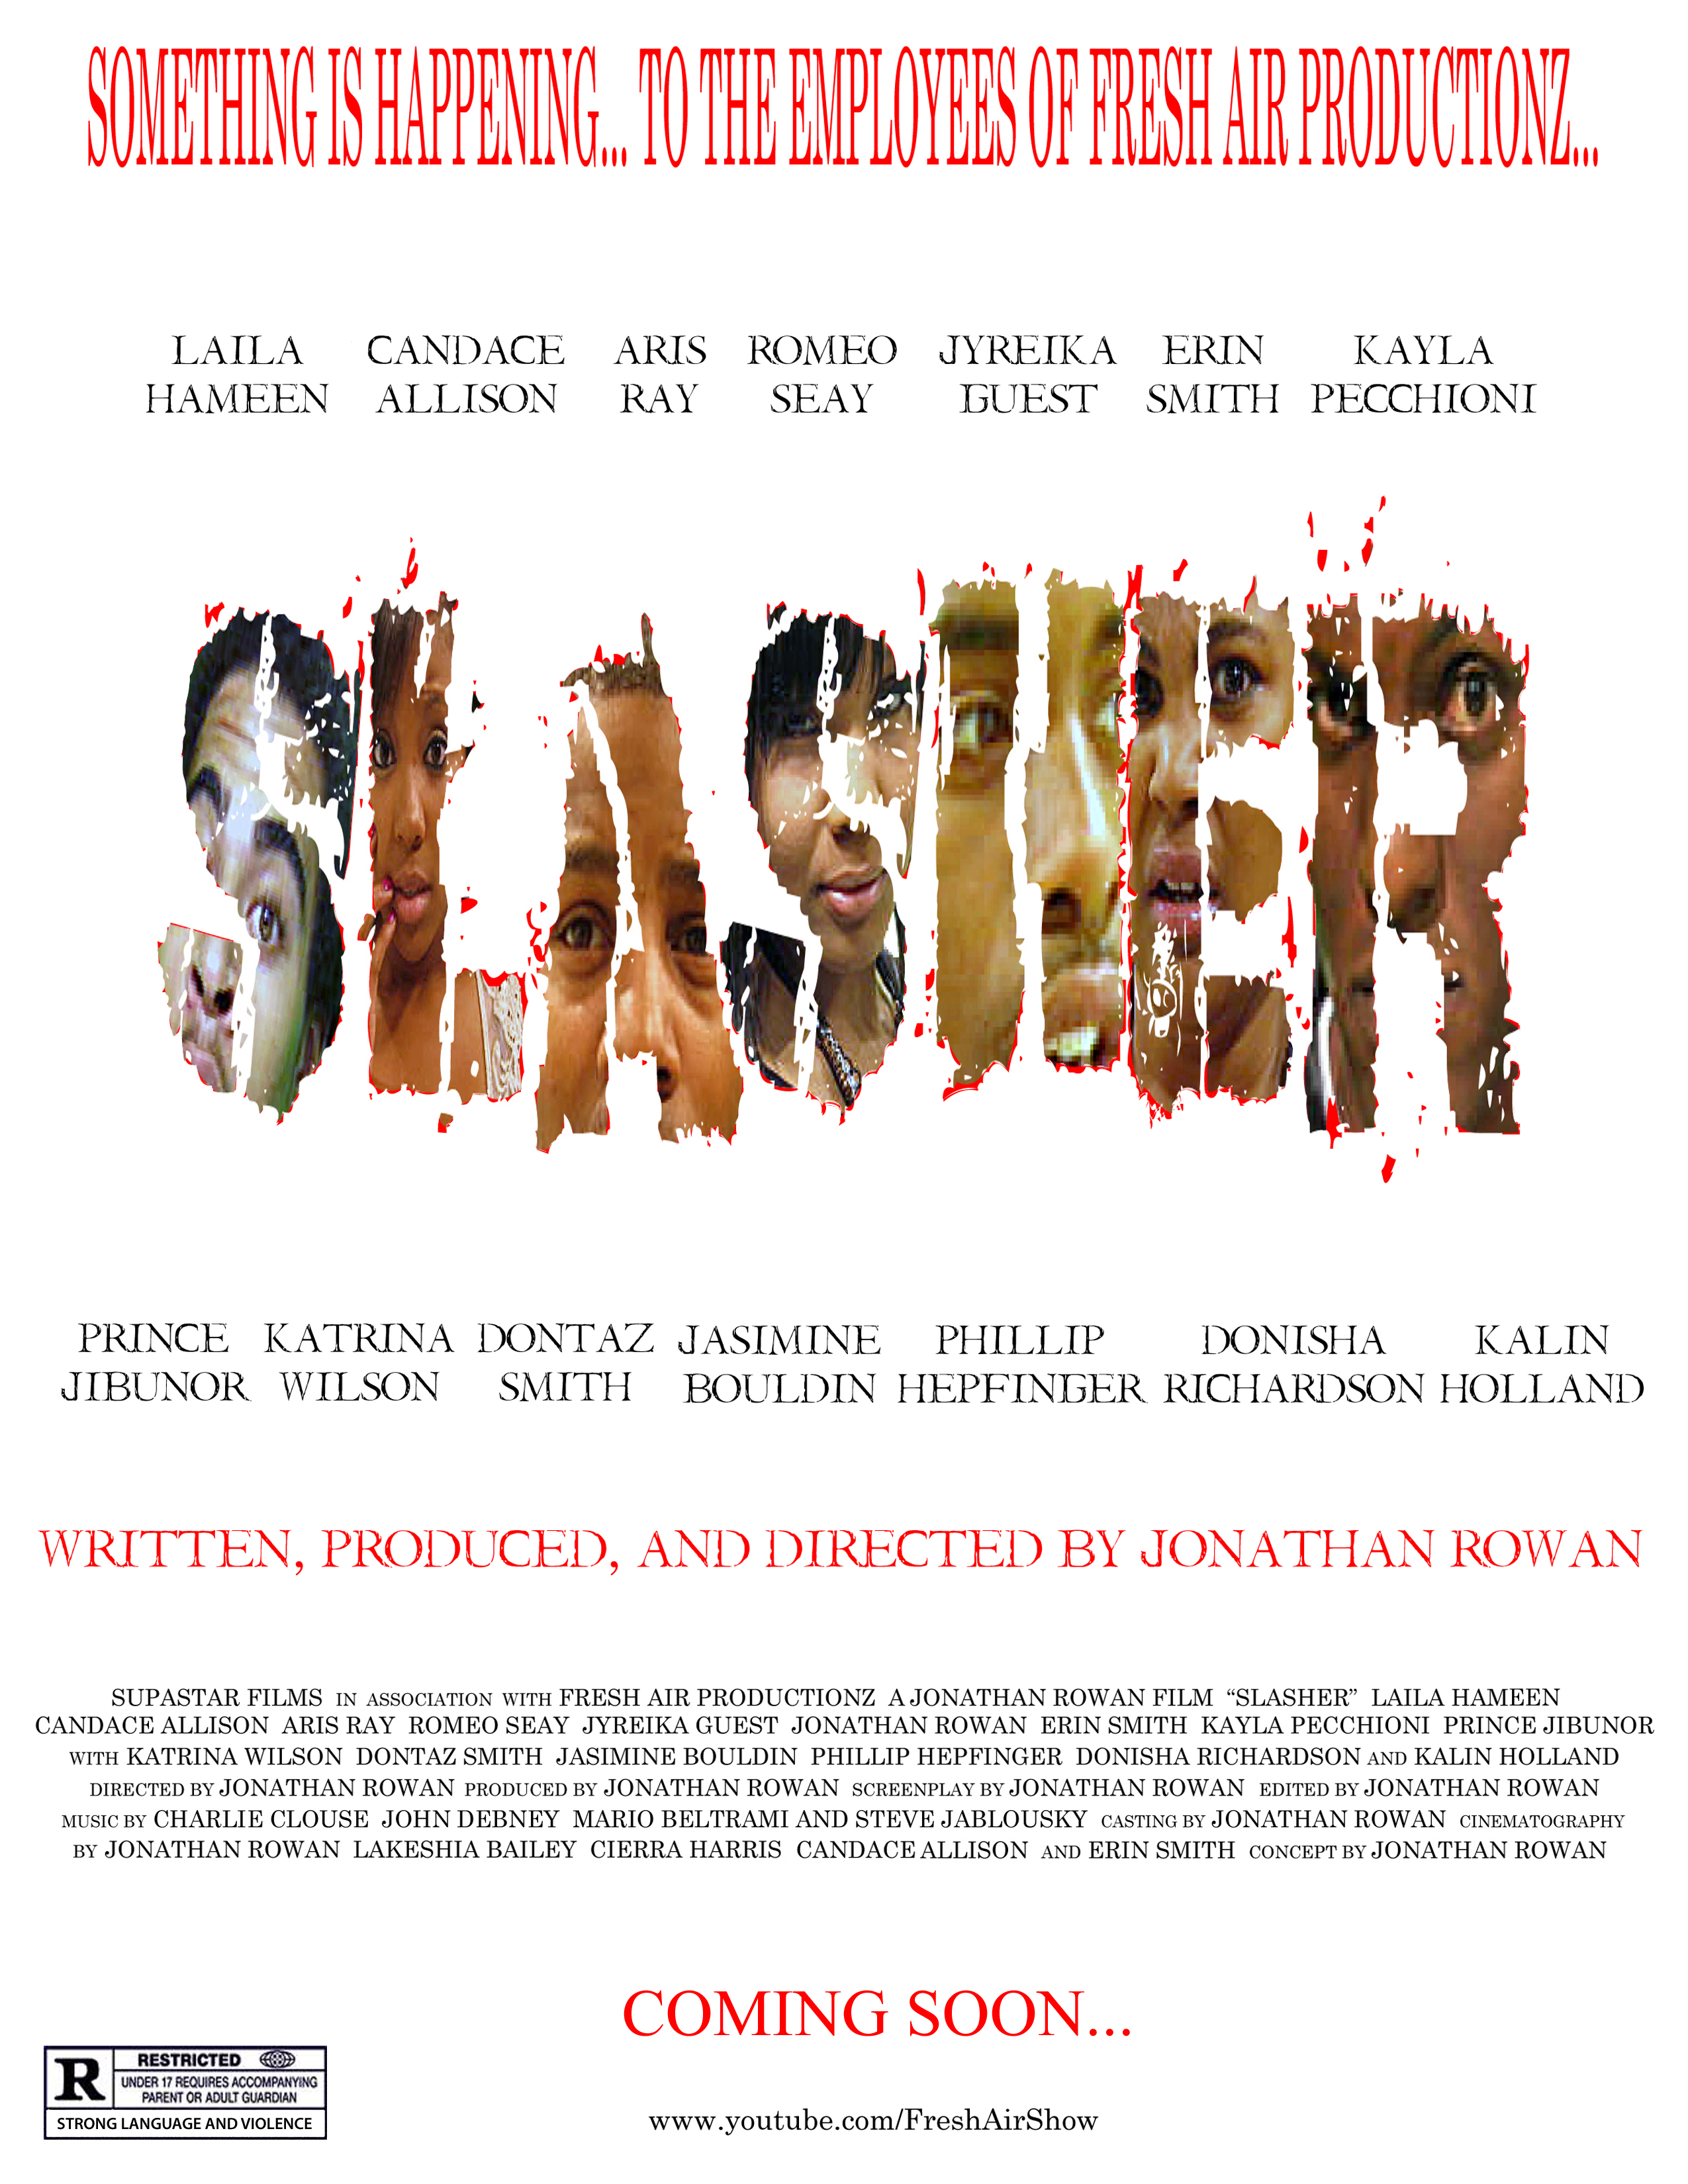 An official movie poster from the American independent horror film Slasher, written, produced, and directed by Jonathan Rowan.